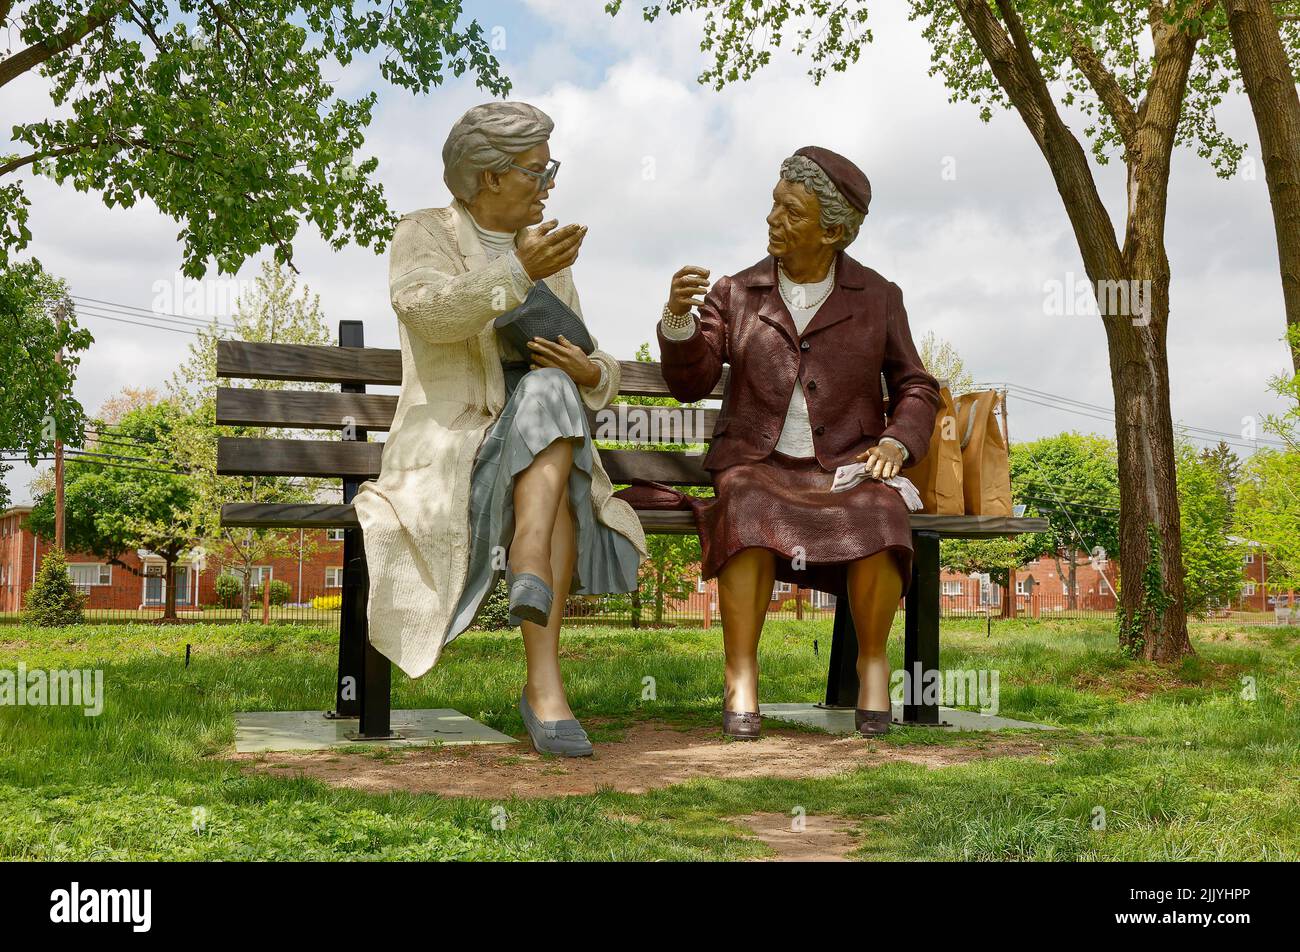 Crossing Paths, large aluminum sculpture, two elderly women on bench, talking, paper lunch bags, by Seward Johnson, Seward Johnson Center for the Arts Stock Photo